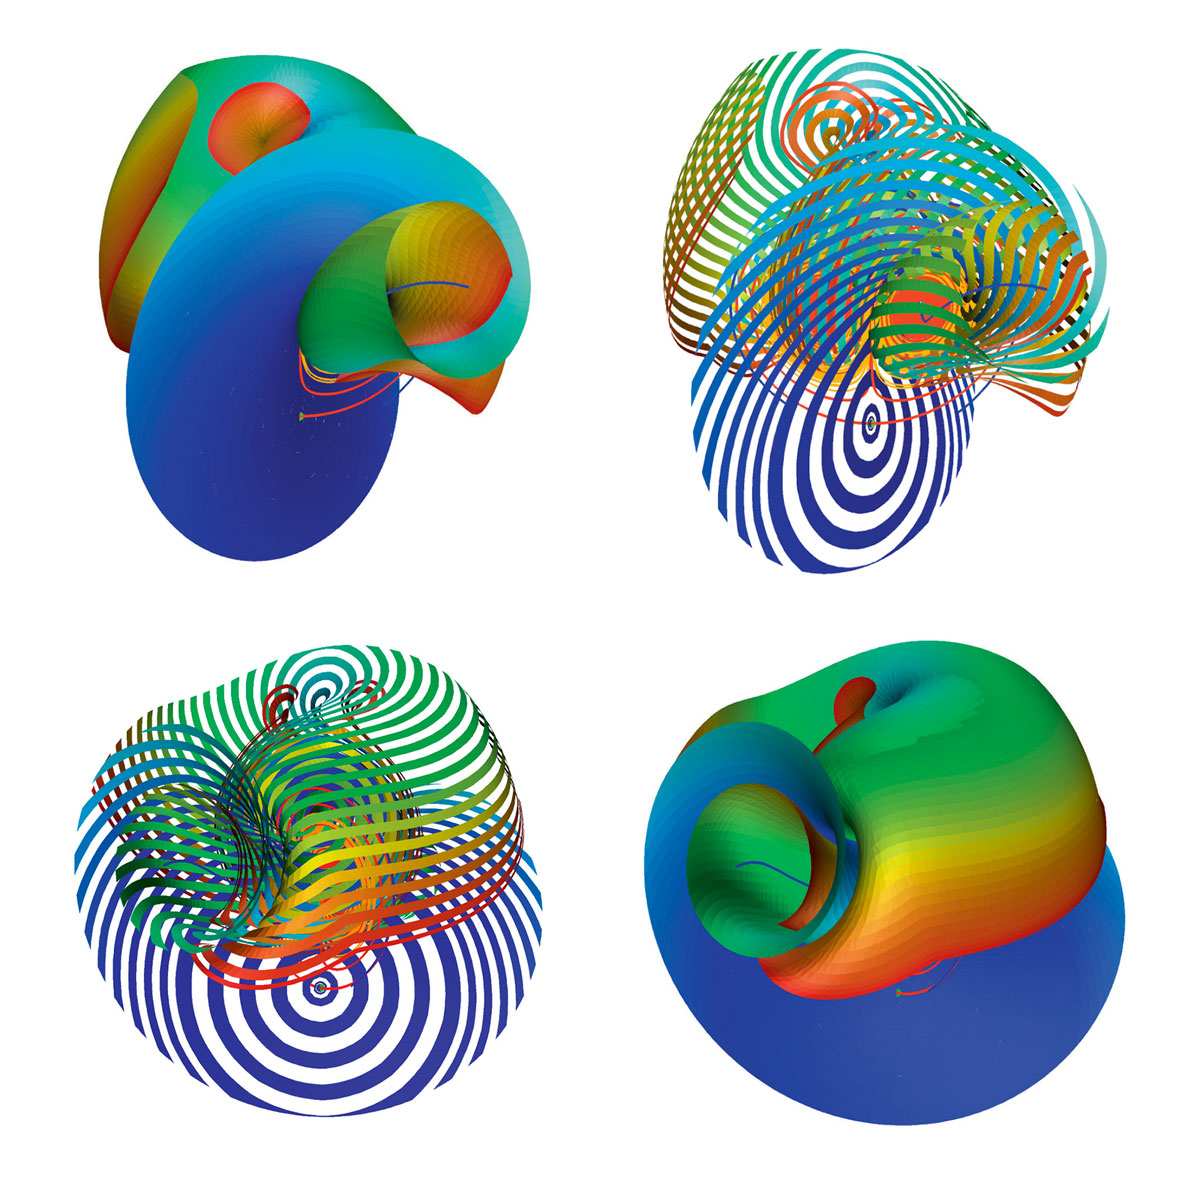 Four graphics representing details of the Lorenz manifold near the Lorenz attractor. 